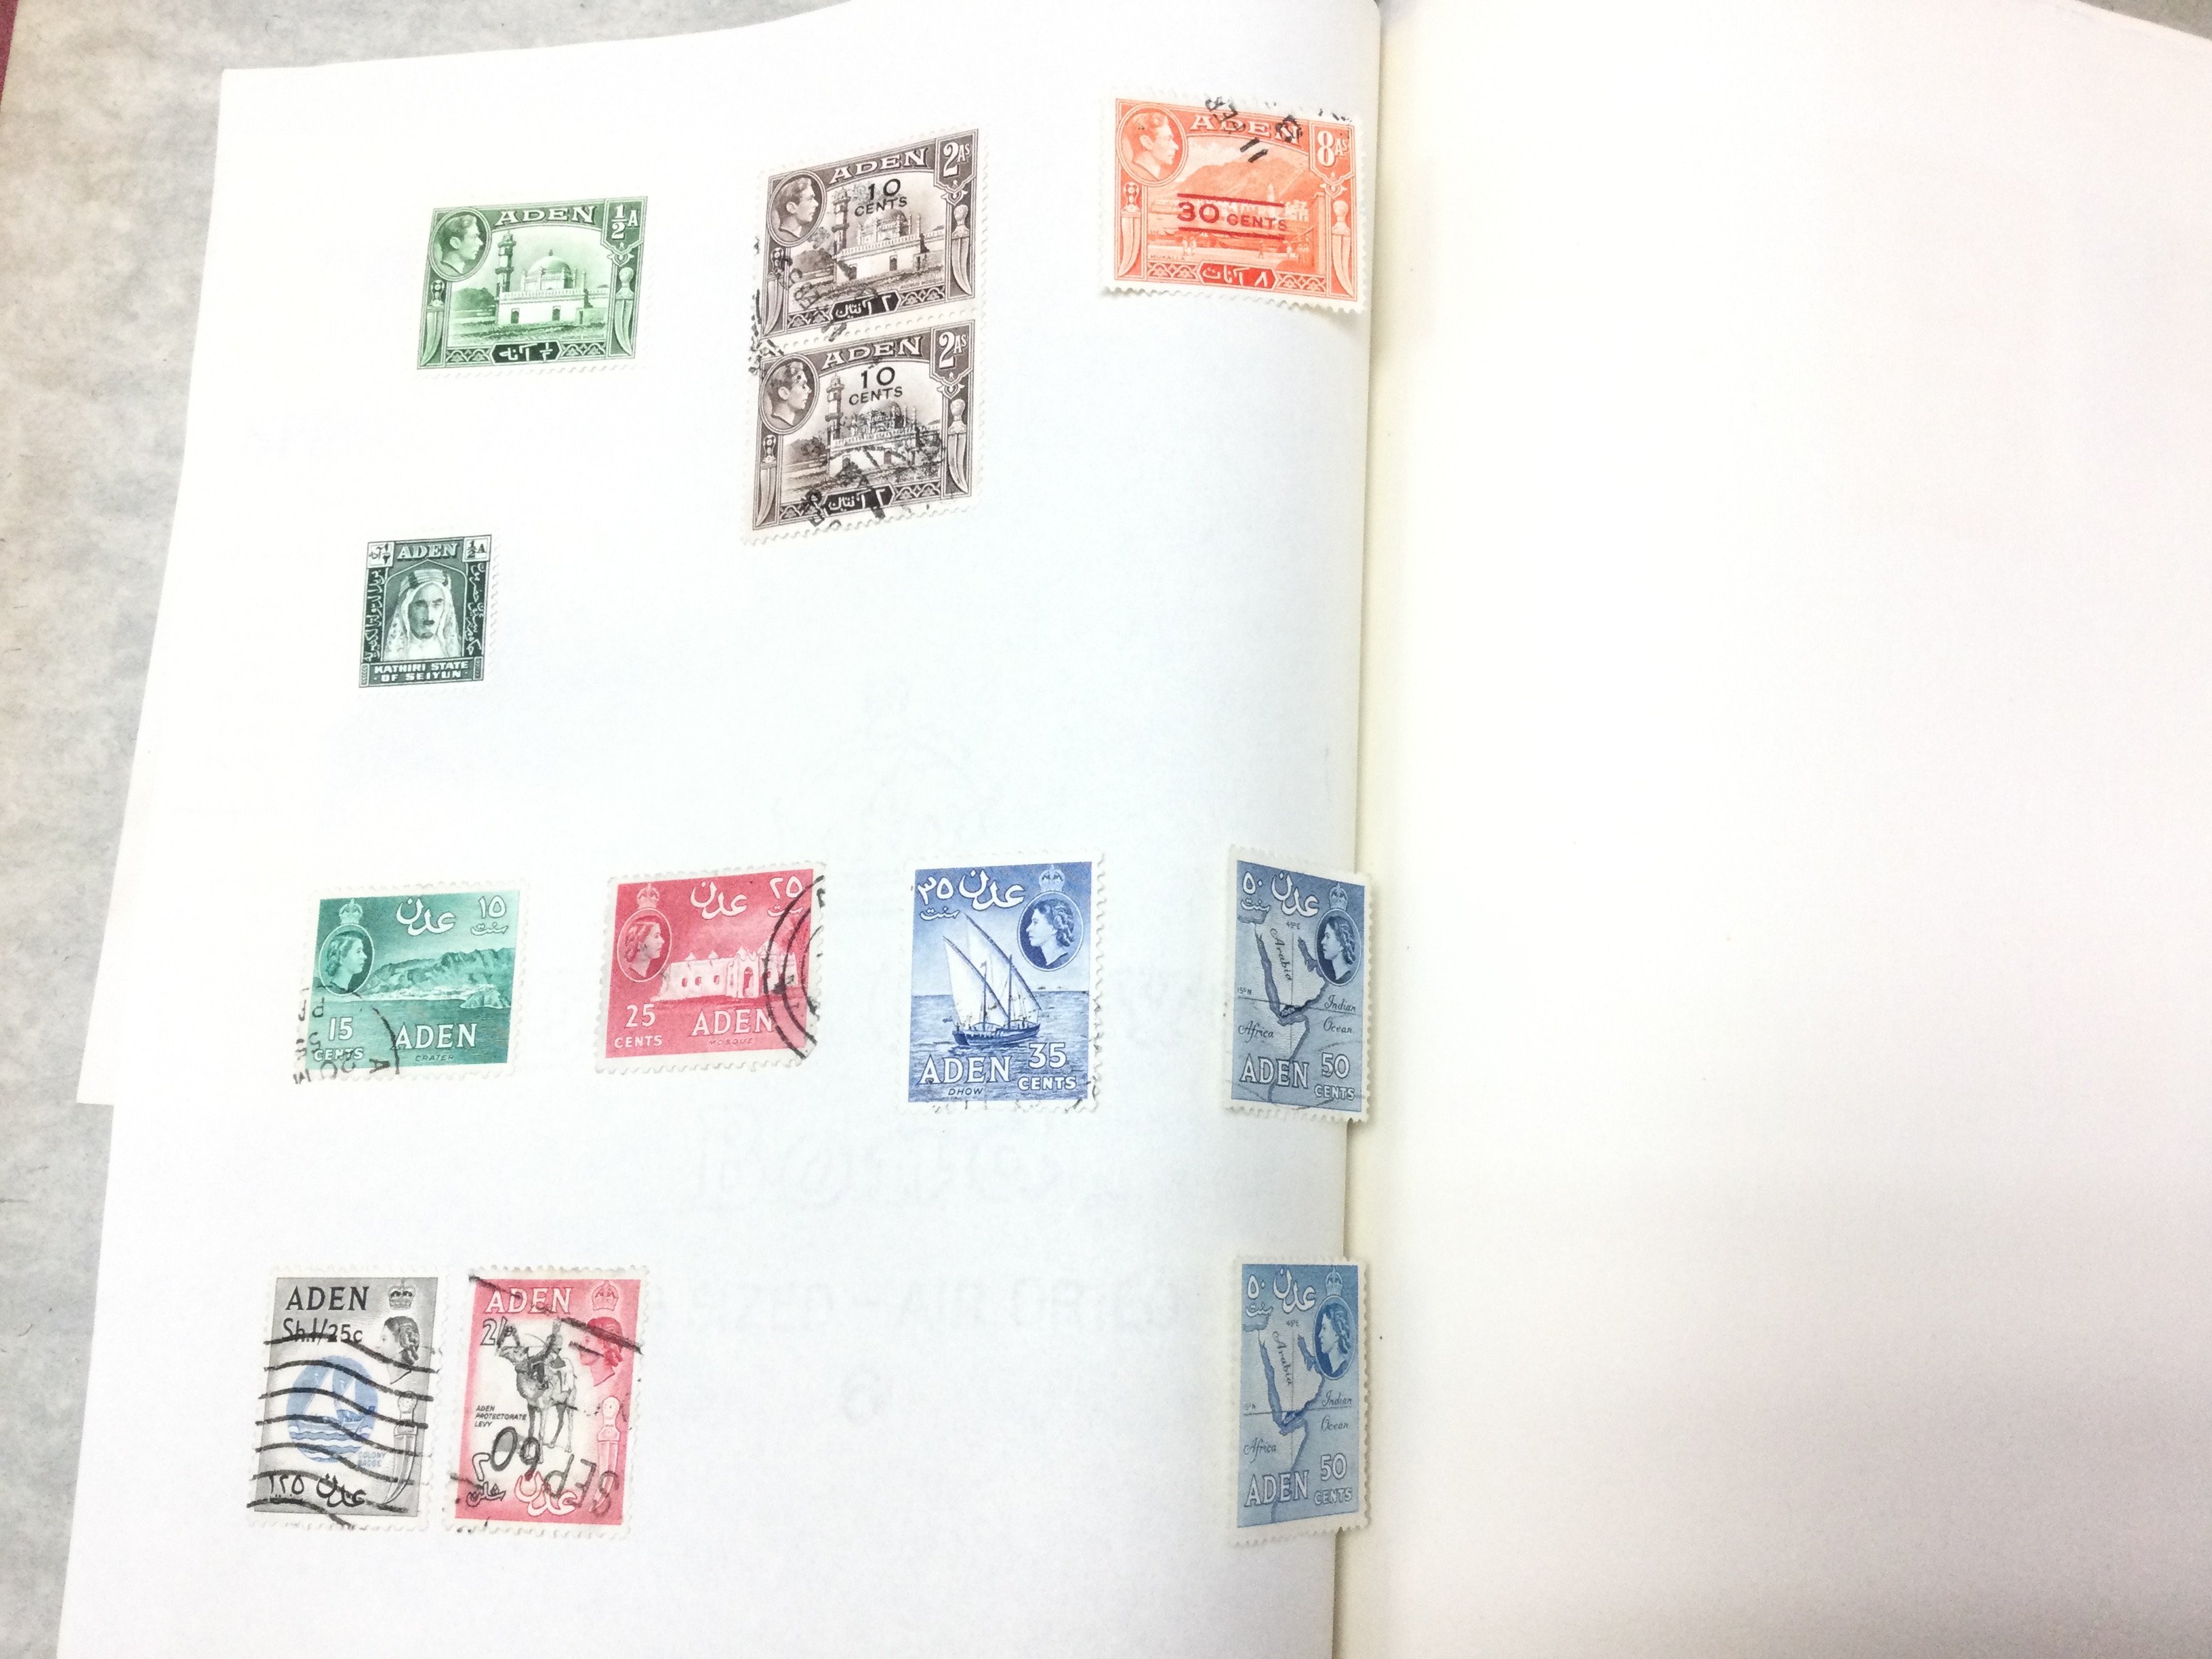 A British & Commonwealth stamp album, postage cate - Image 3 of 10